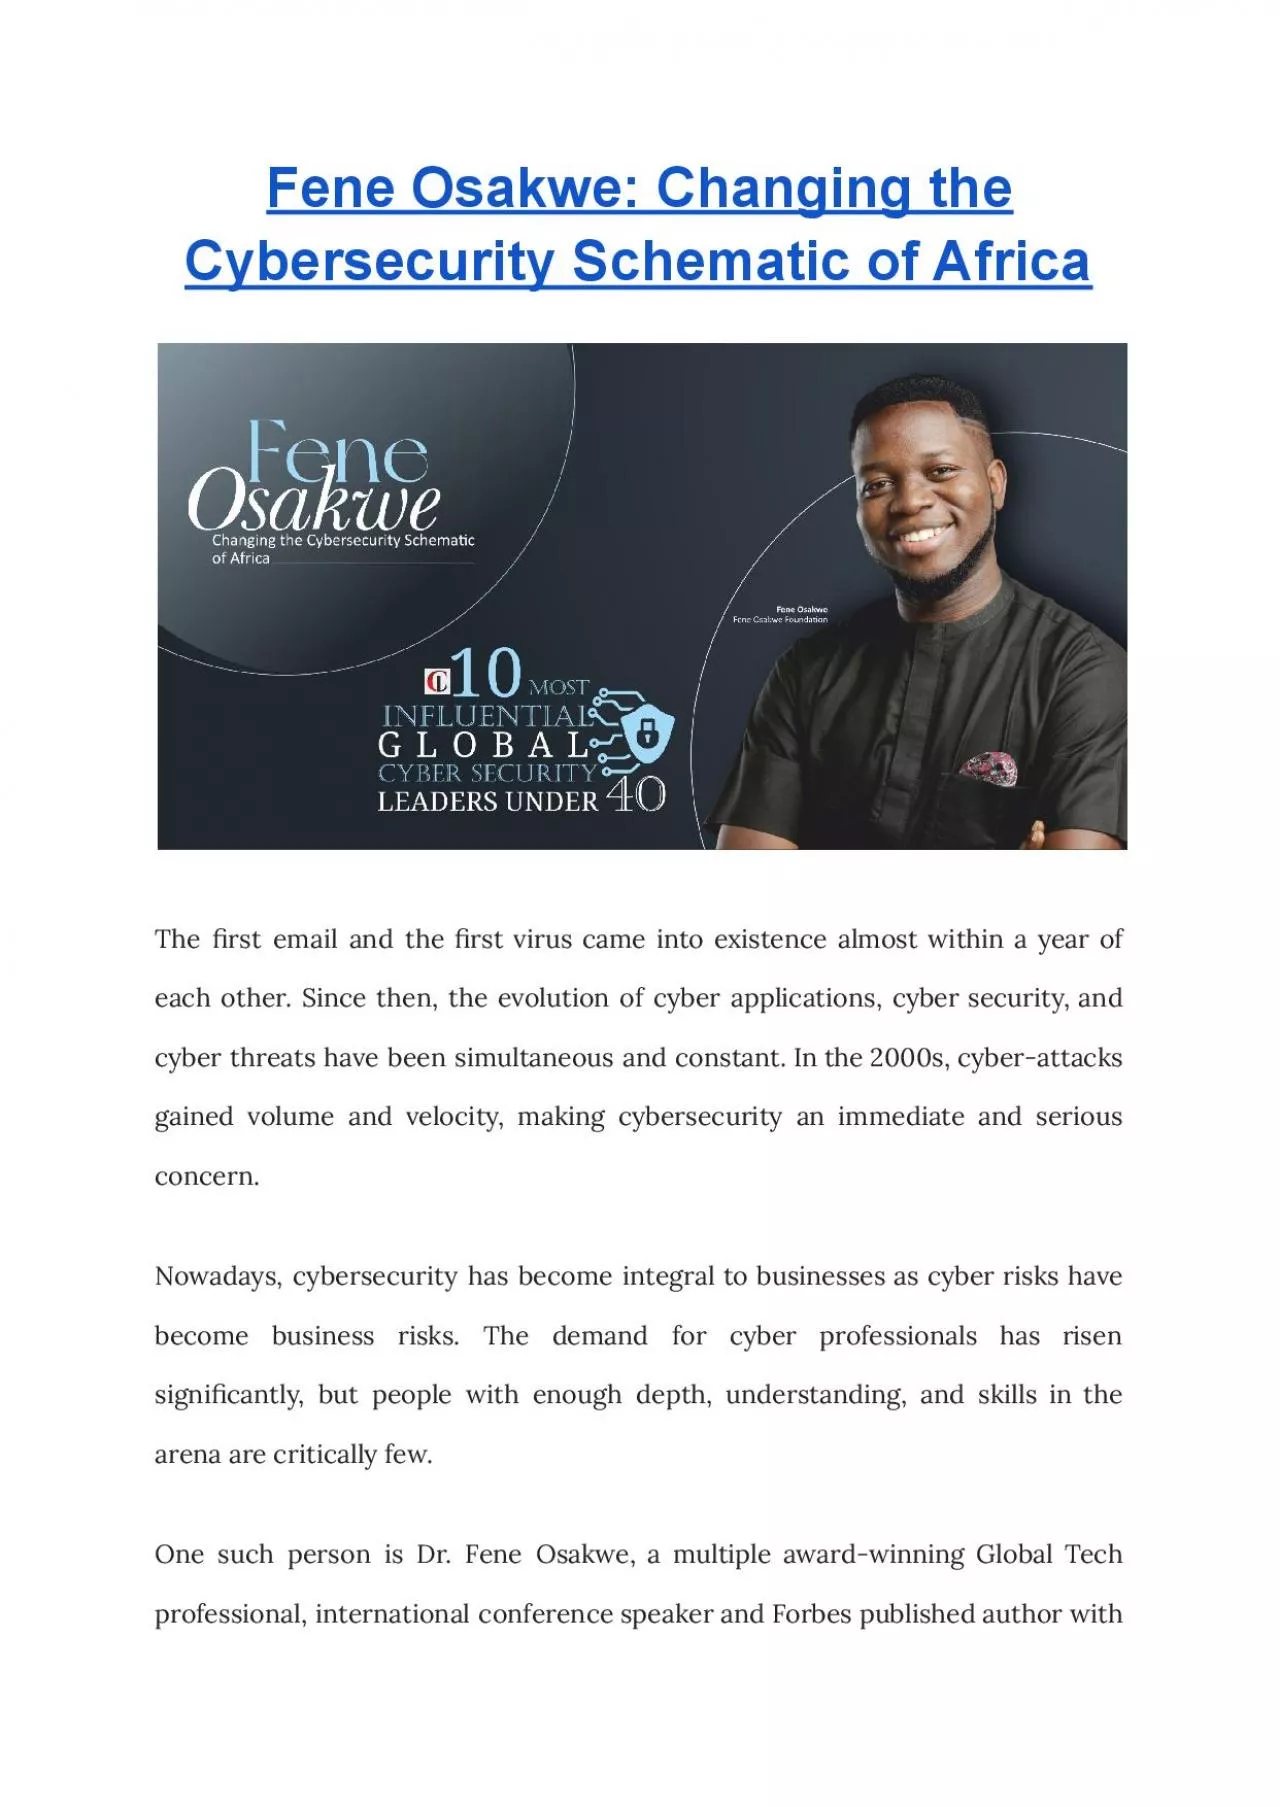 Fene Osakwe: Changing the Cybersecurity Schematic of Africa